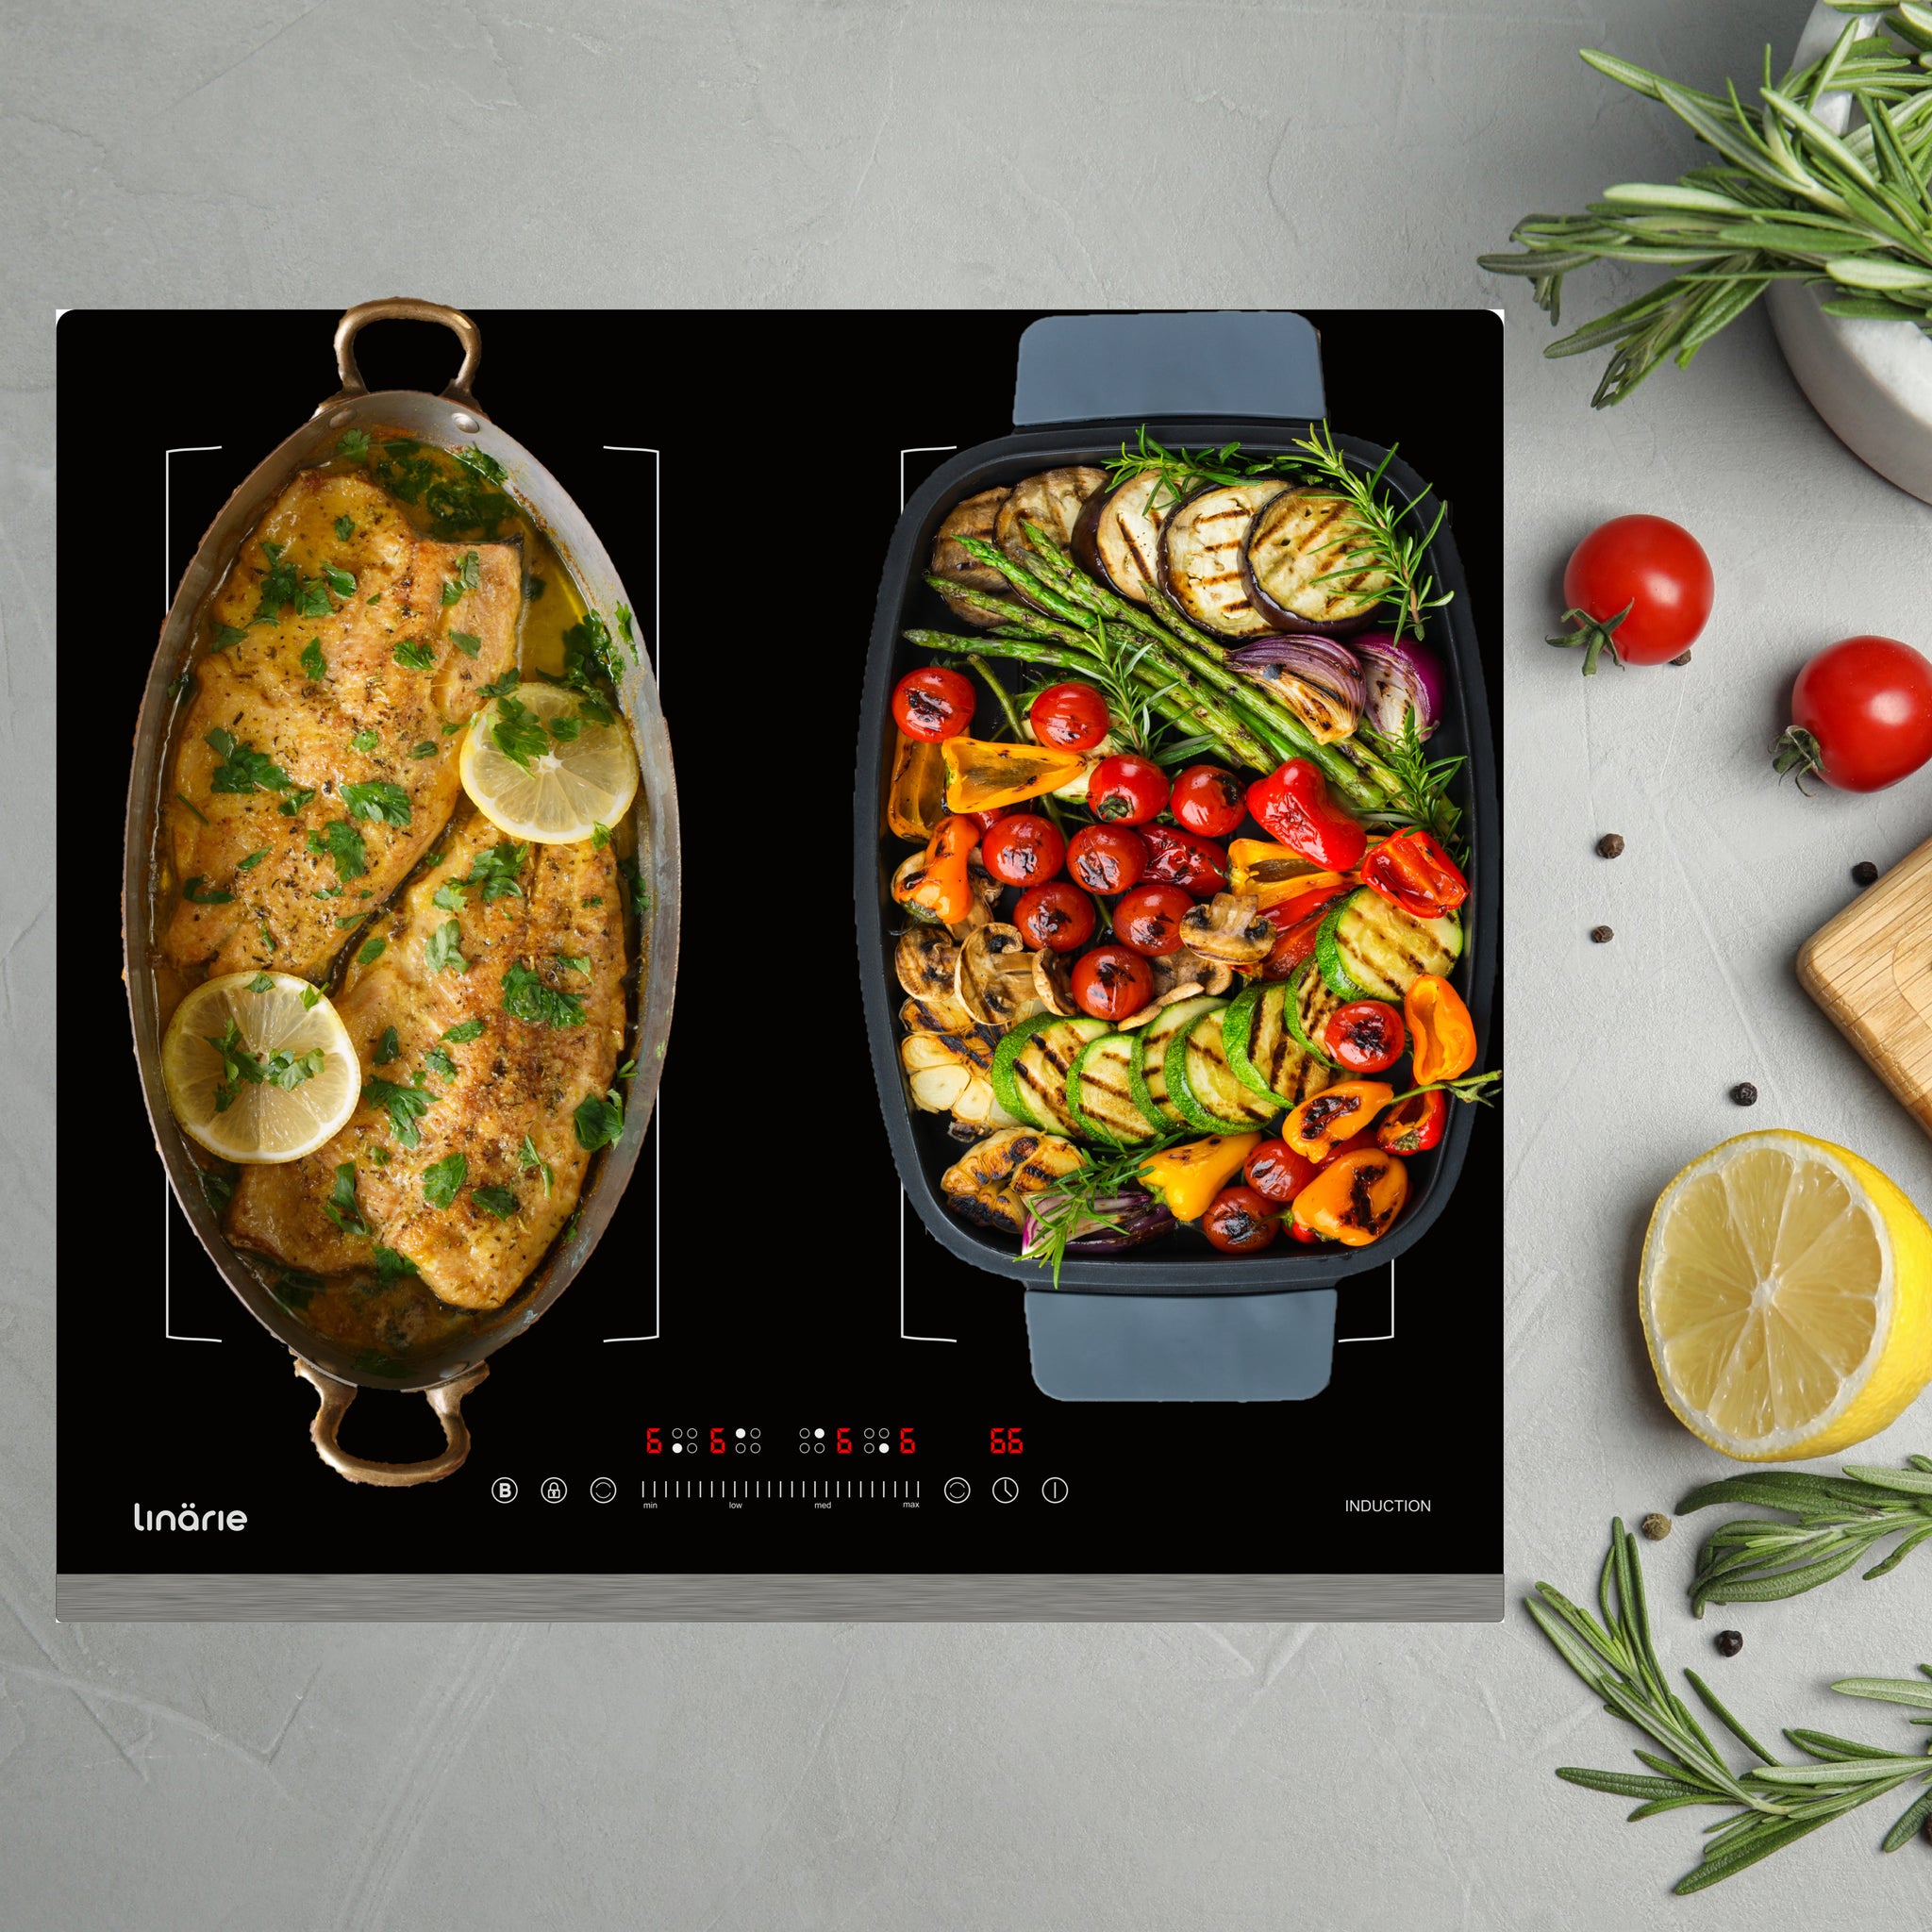 Dijon Zone Induction Cooktop